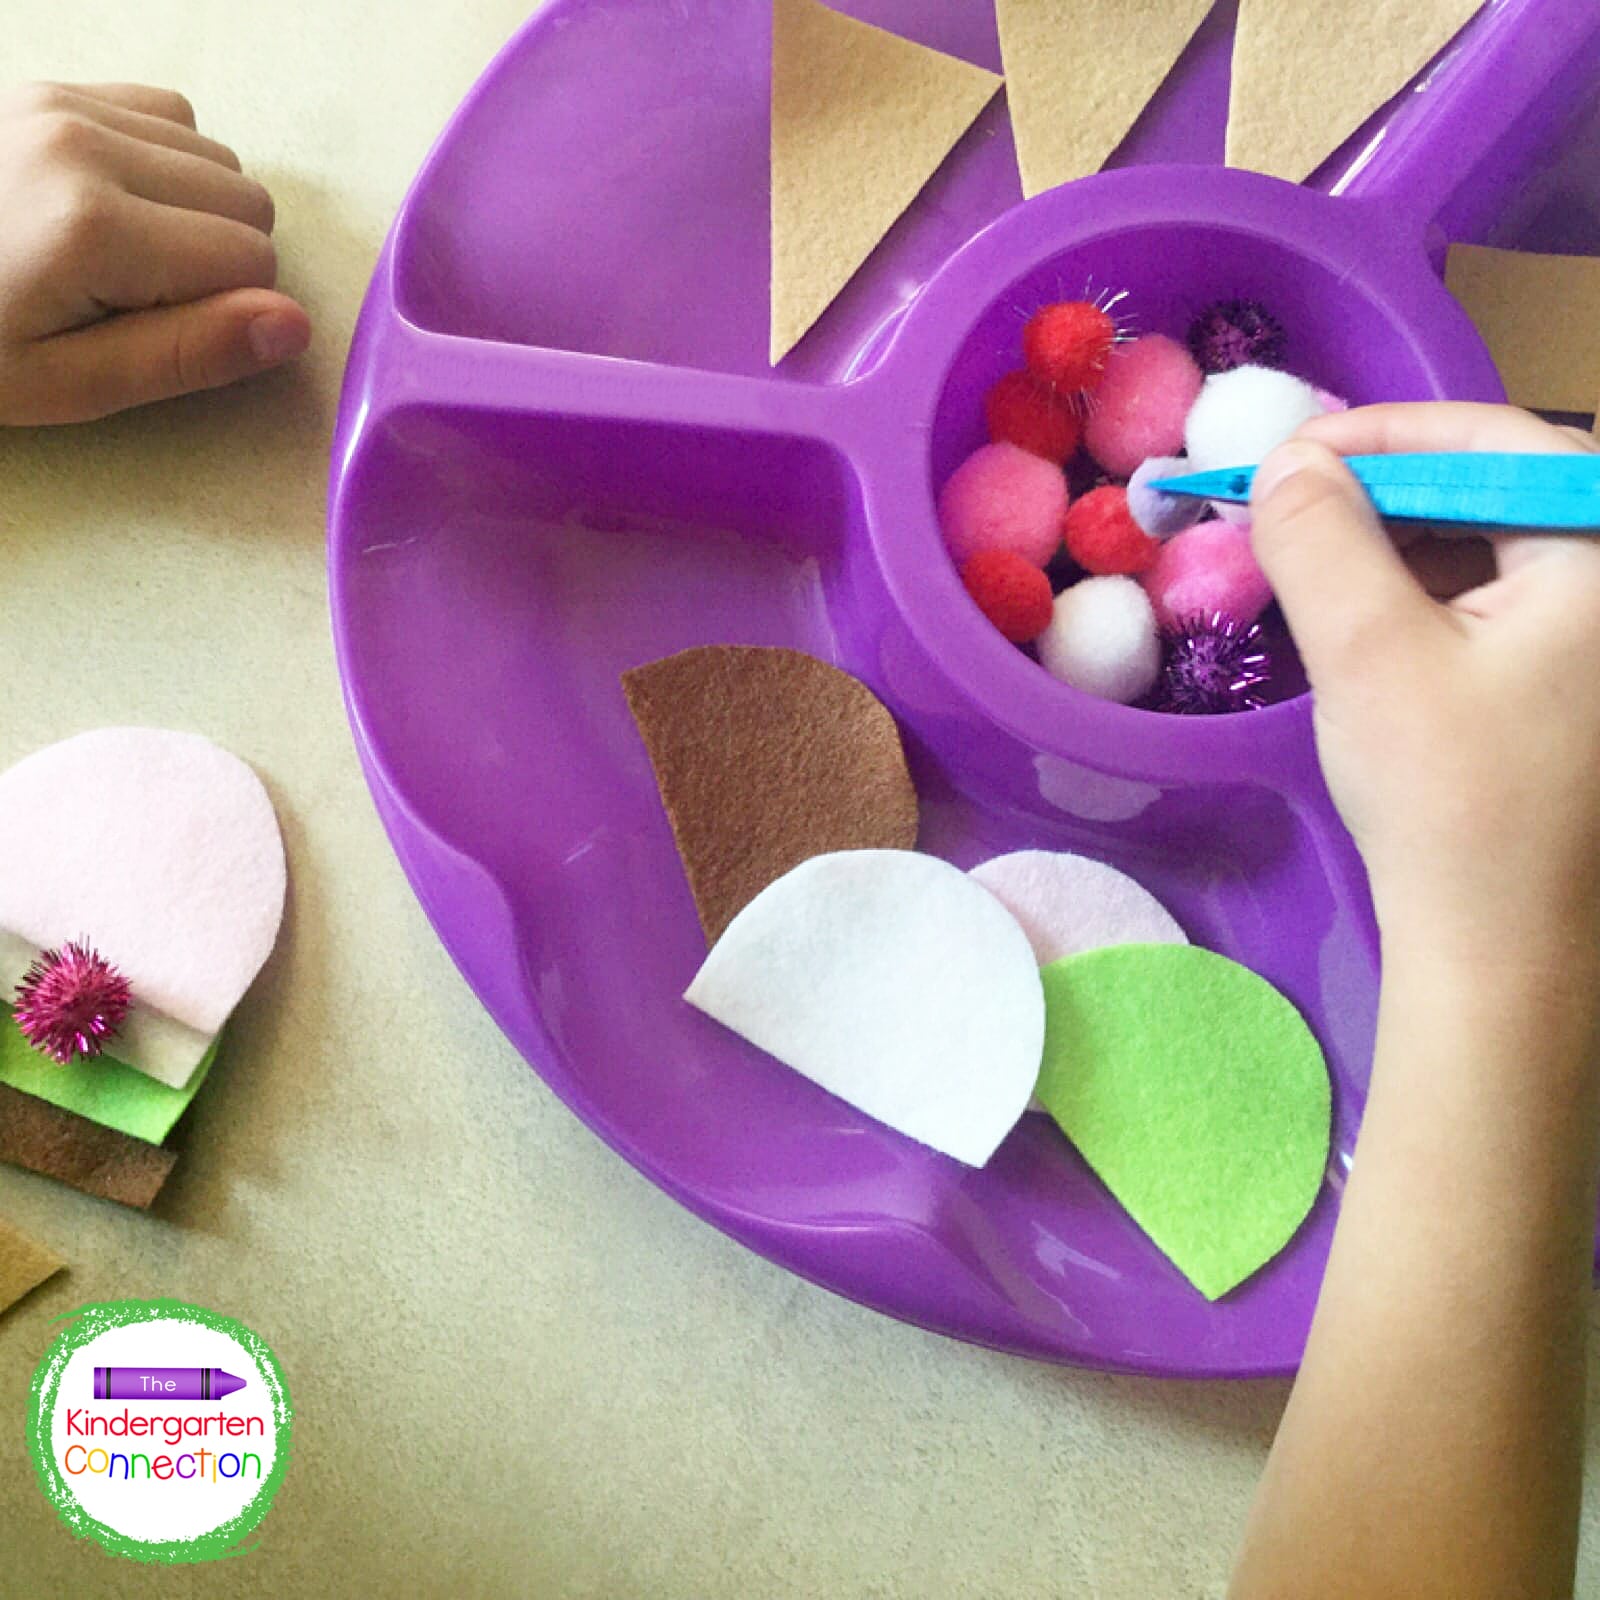 Give students plastic tweezers and they are all set to build their ice cream cones and practice fine motor skills.